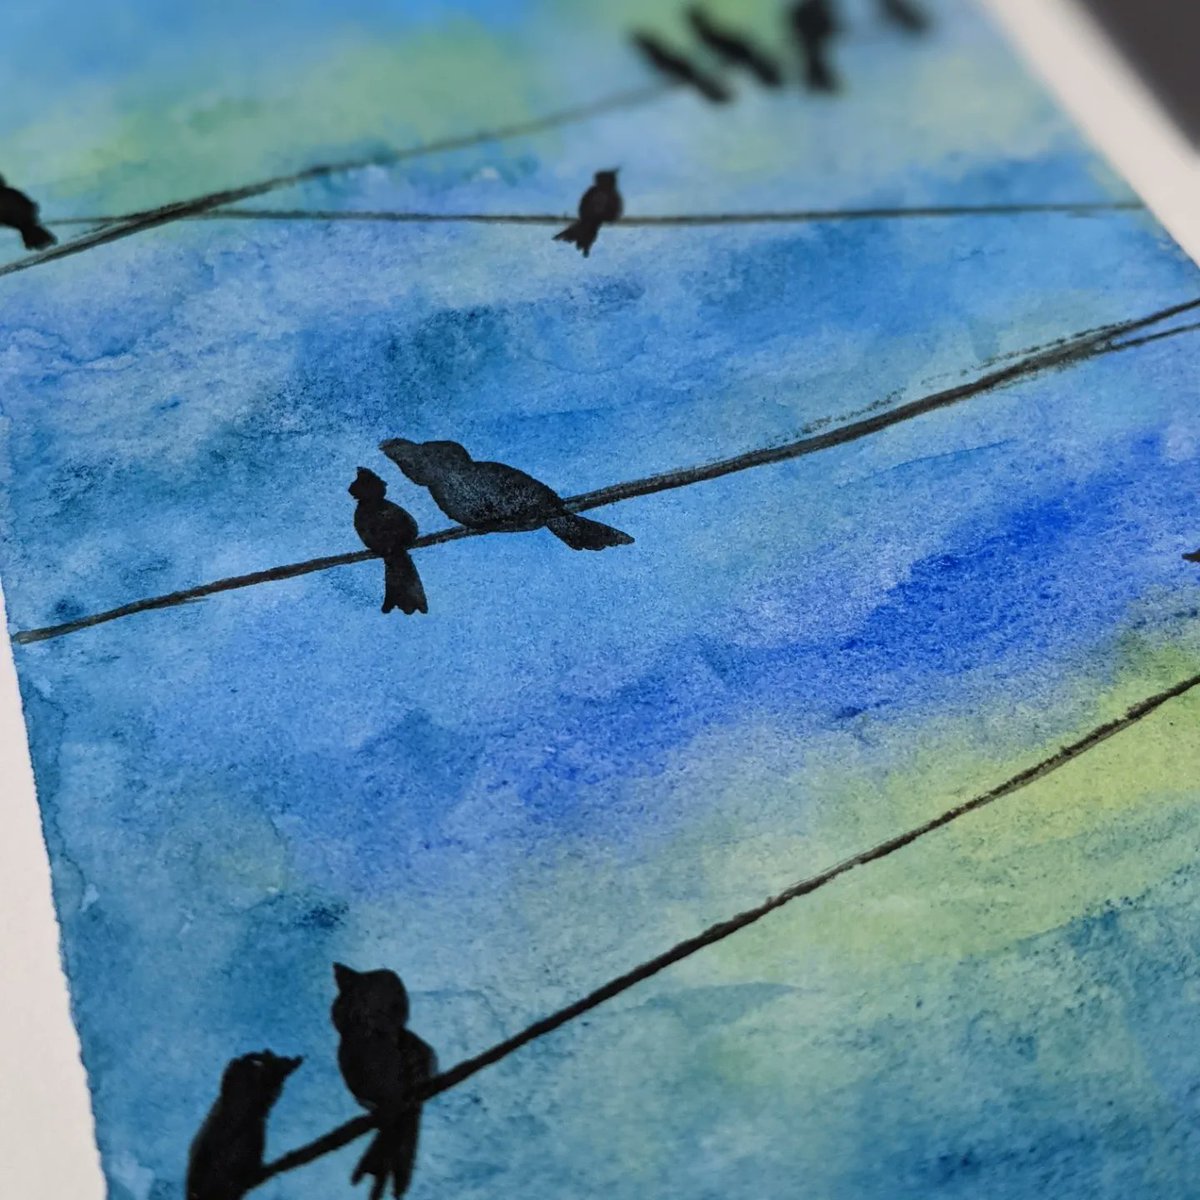 Pink or blue? Sunday morning virtual paint date with @BeckaWhy following the 'For the Birds' tutorial from @letsgomakeart ! More pics: bit.ly/3Ih5jVo

#art #watercolor #painting  #letsmakeart